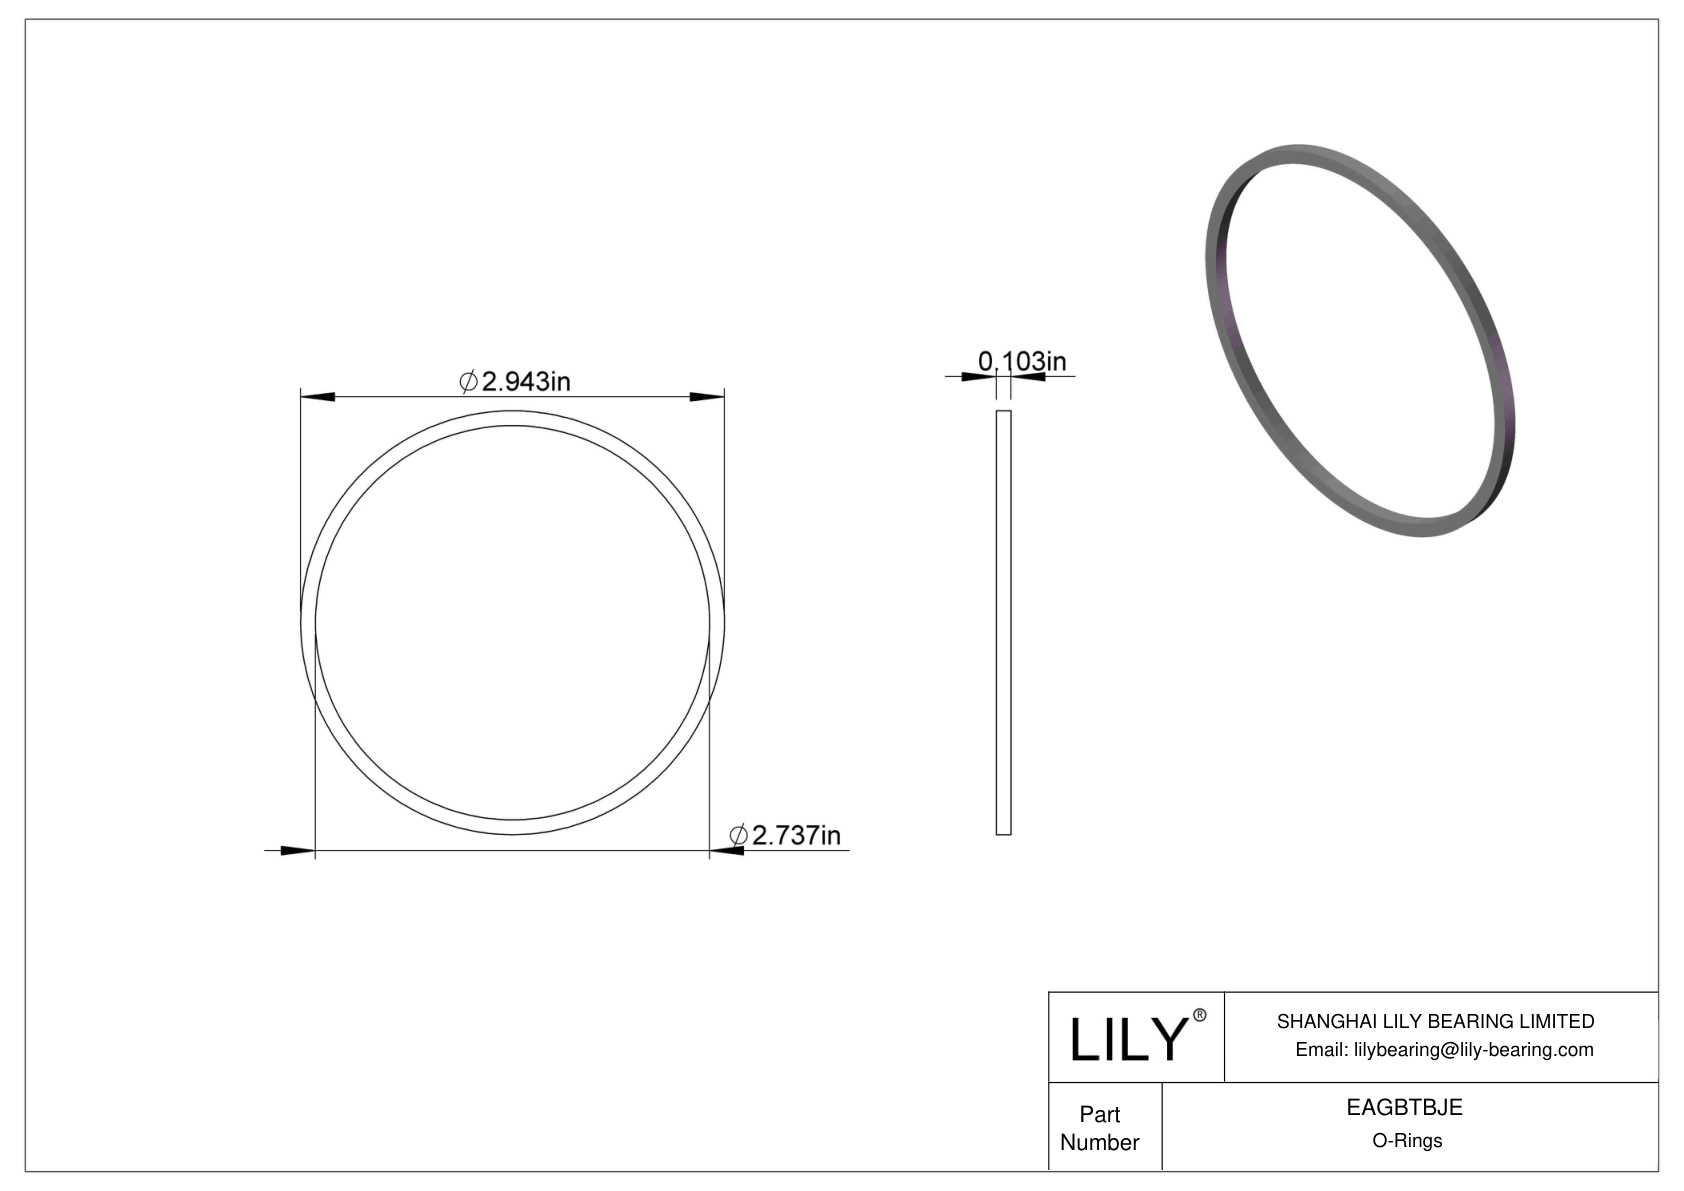 EAGBTBJE Oil Resistant O-Rings Square cad drawing